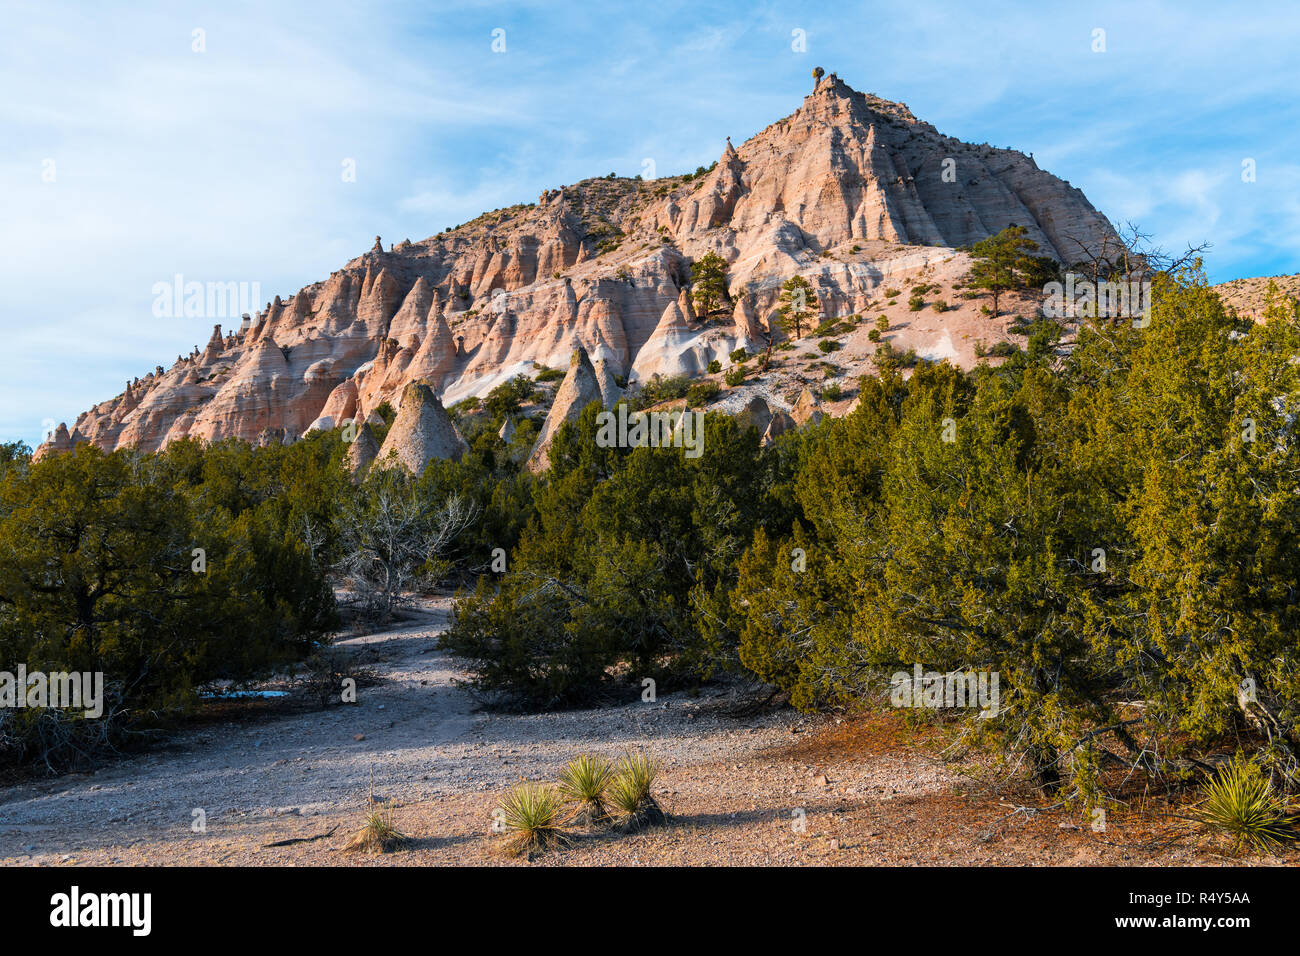 Colorful red rock peak with numerous hoodoo rock formations in evening light at Kasha-Katuwe Tent Rocks National Monument near Santa Fe, New Mexico Stock Photo